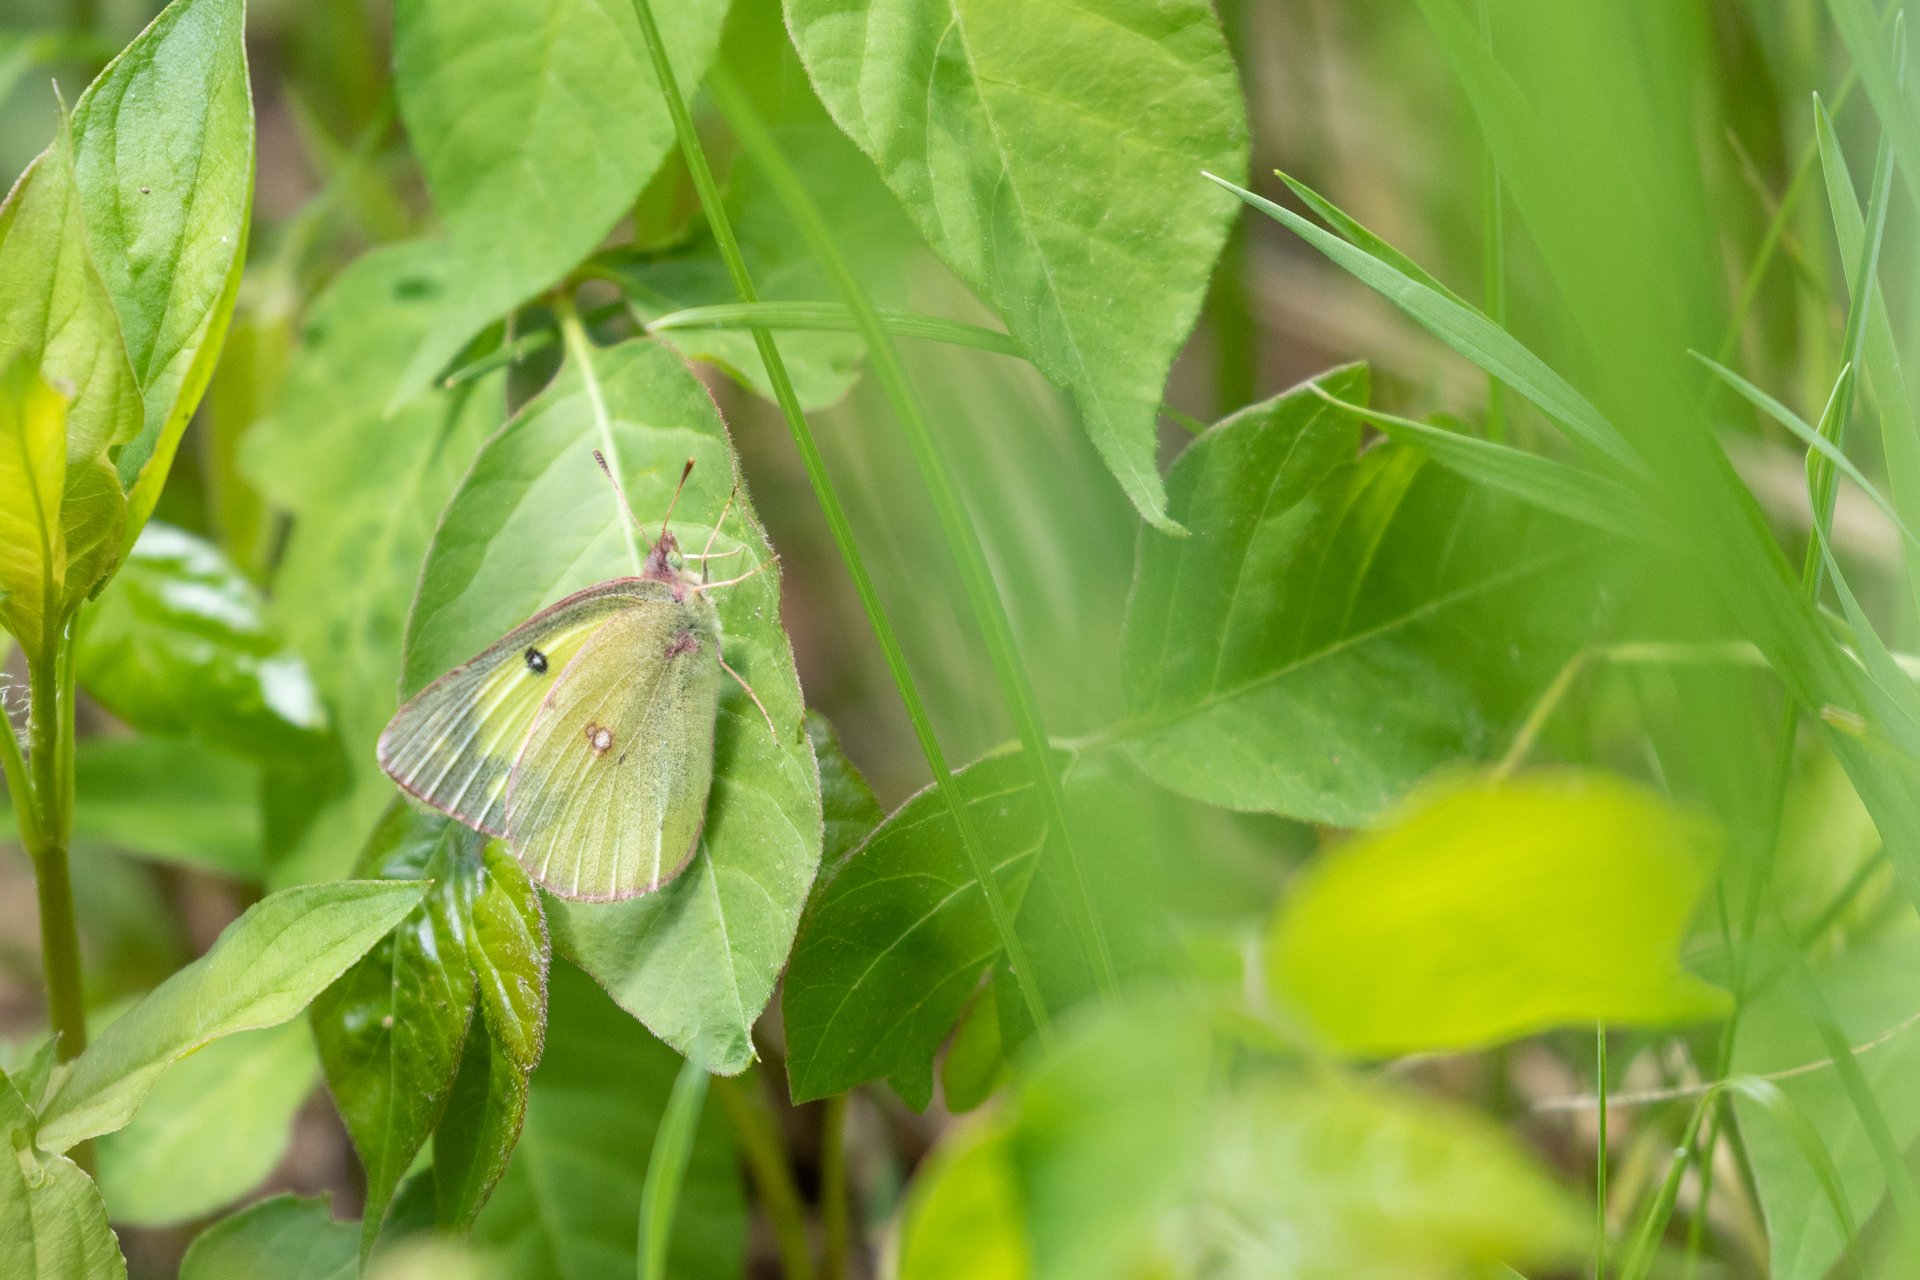 A white butterfly with clear wings on a green leaf.